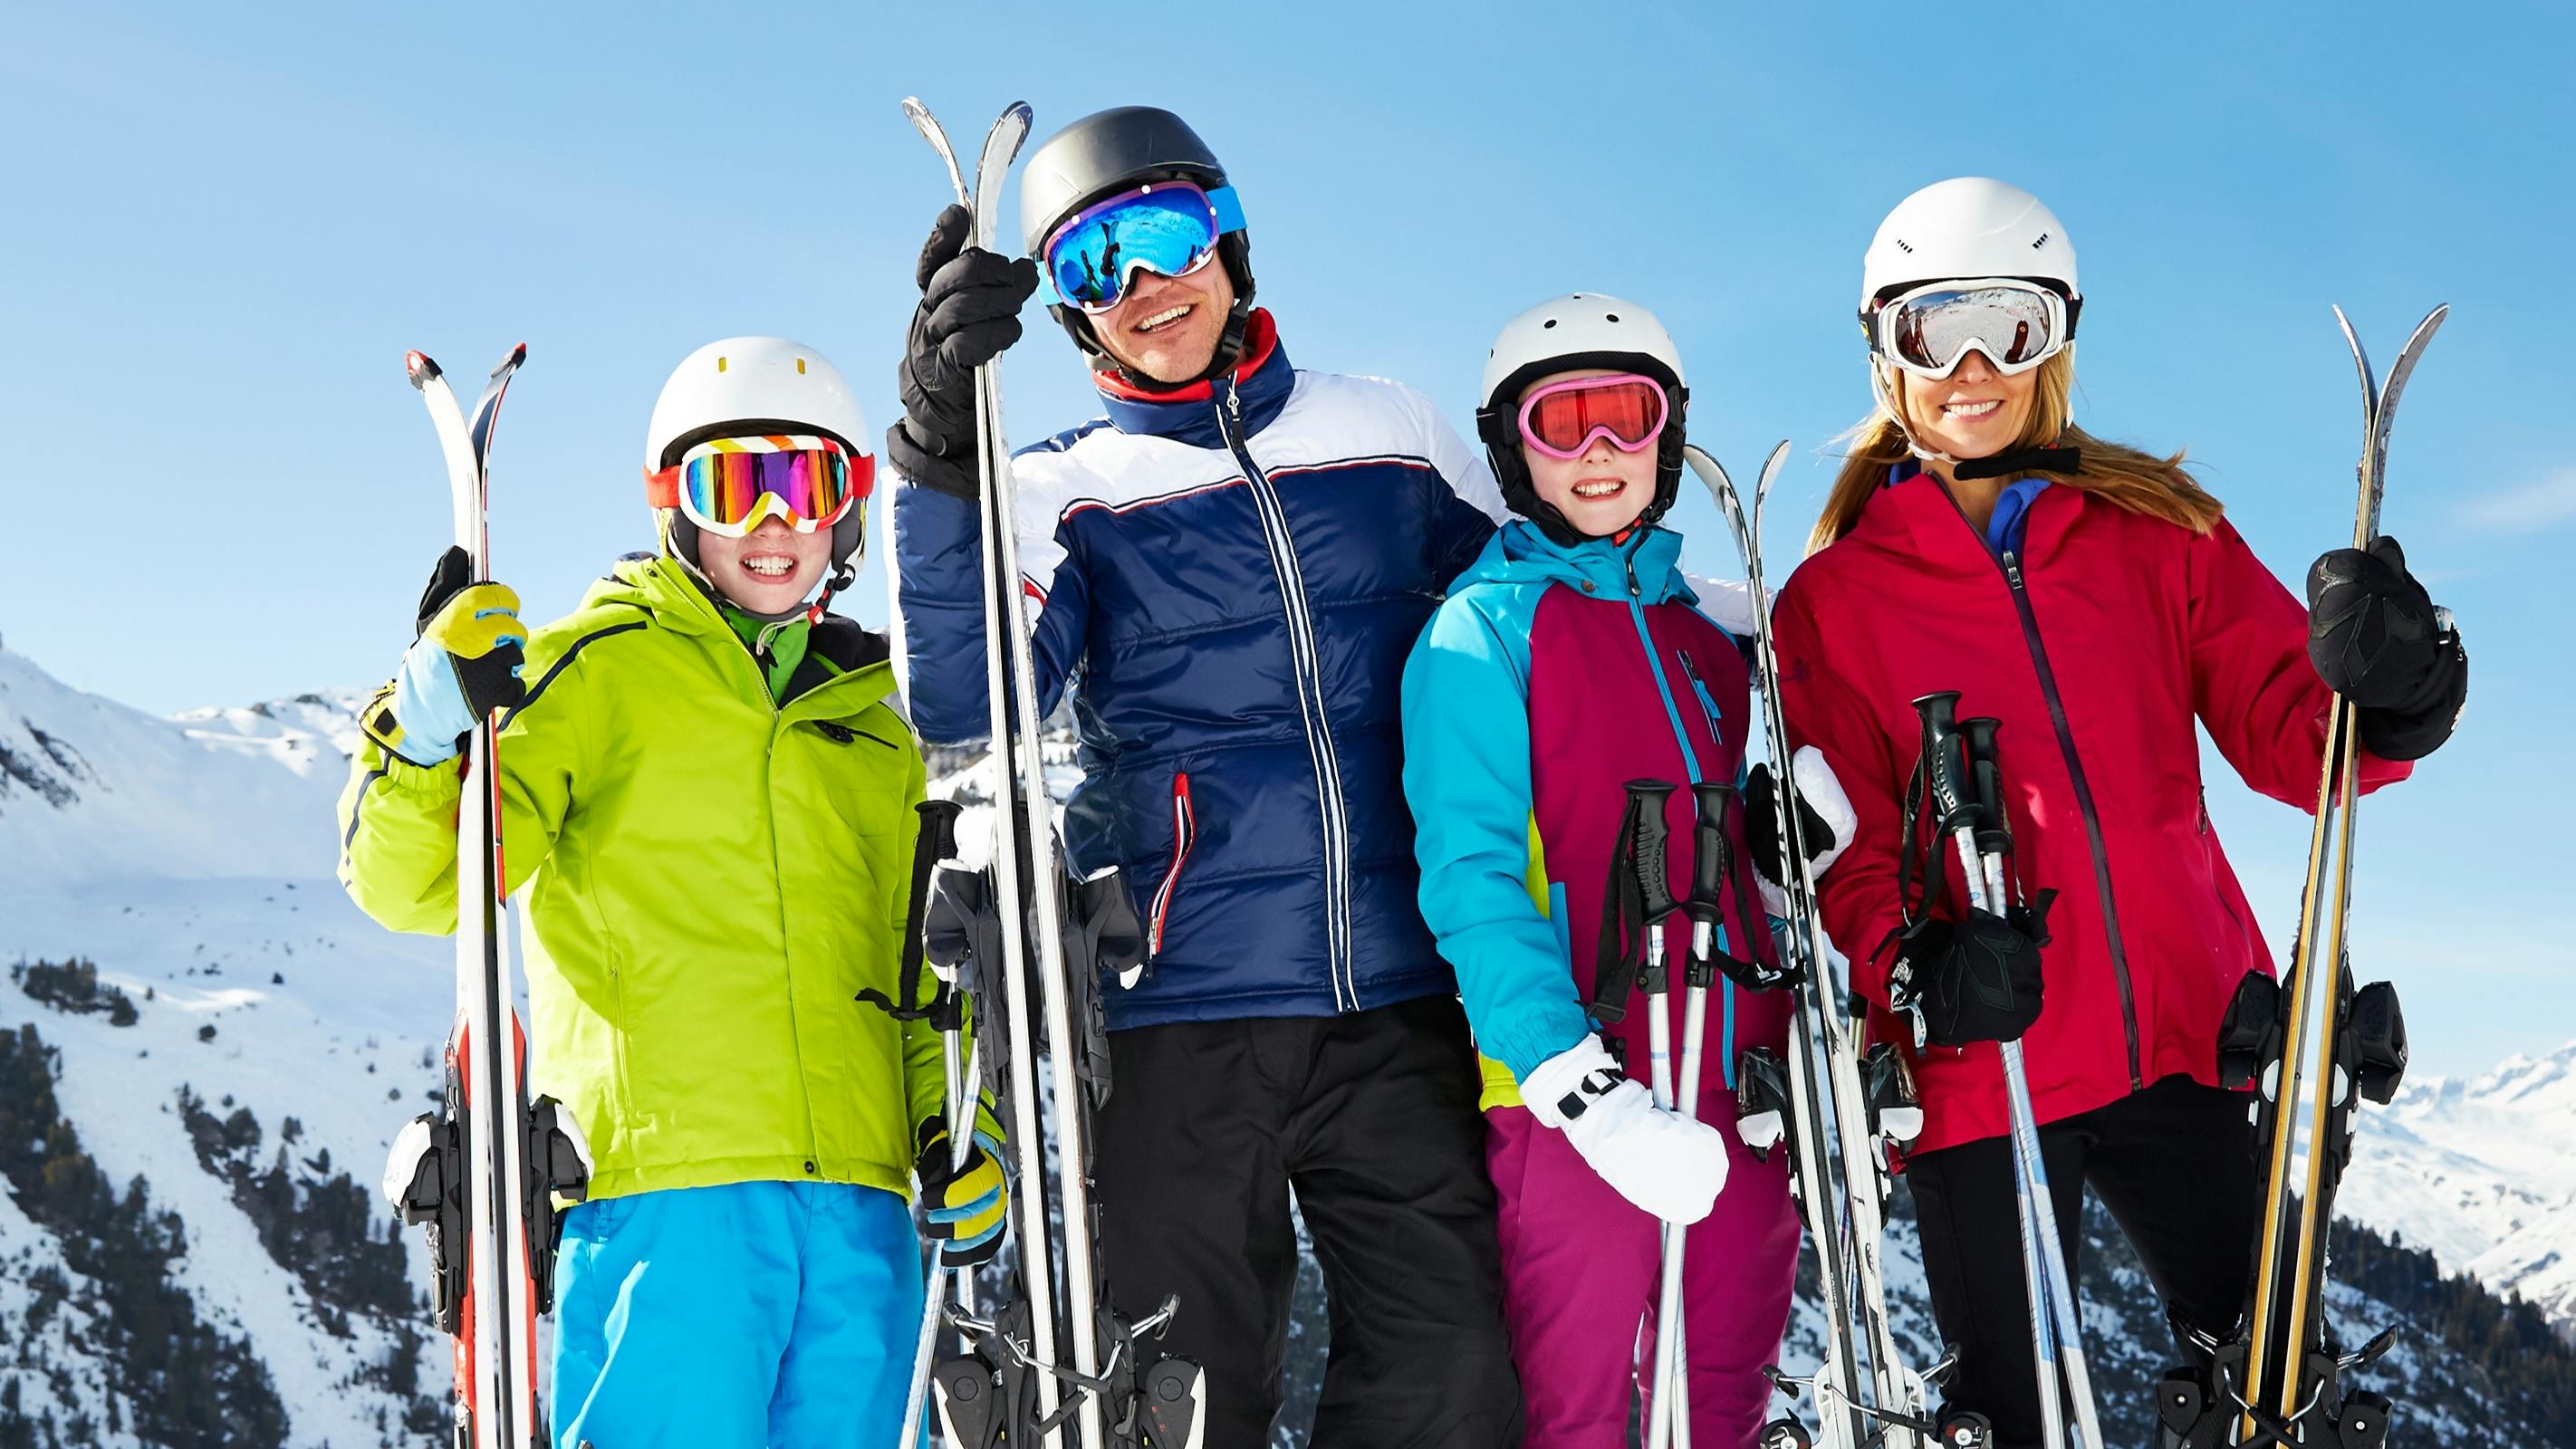 Four skiers standing at the top of a snowy mountain while holding their skis. 